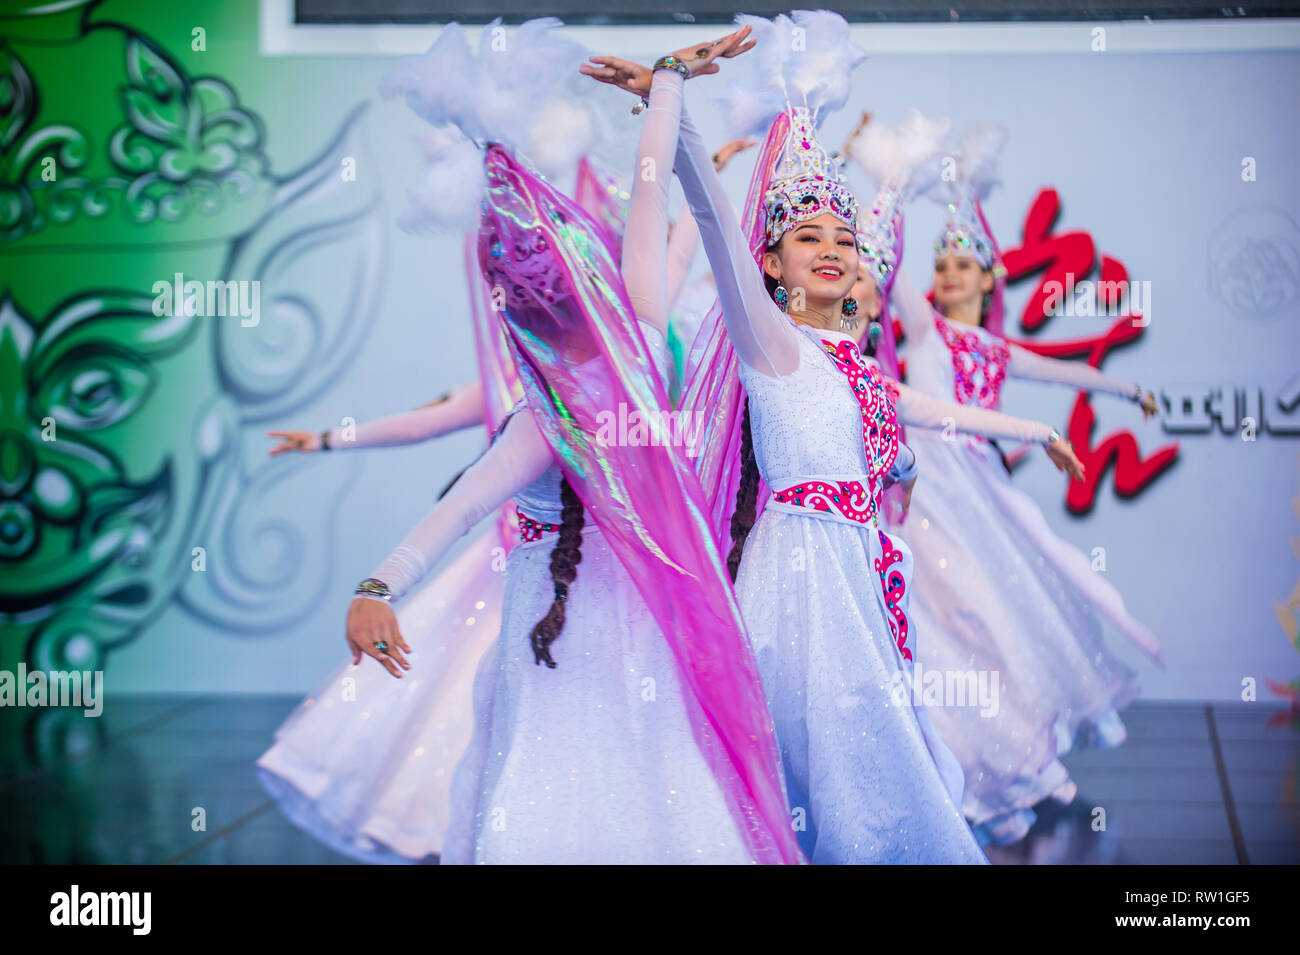 Dancers from the Exemplary Choreographic Ensemble Sholpan perform at the Maskdance festival held in Andong South Korea Stock Photo